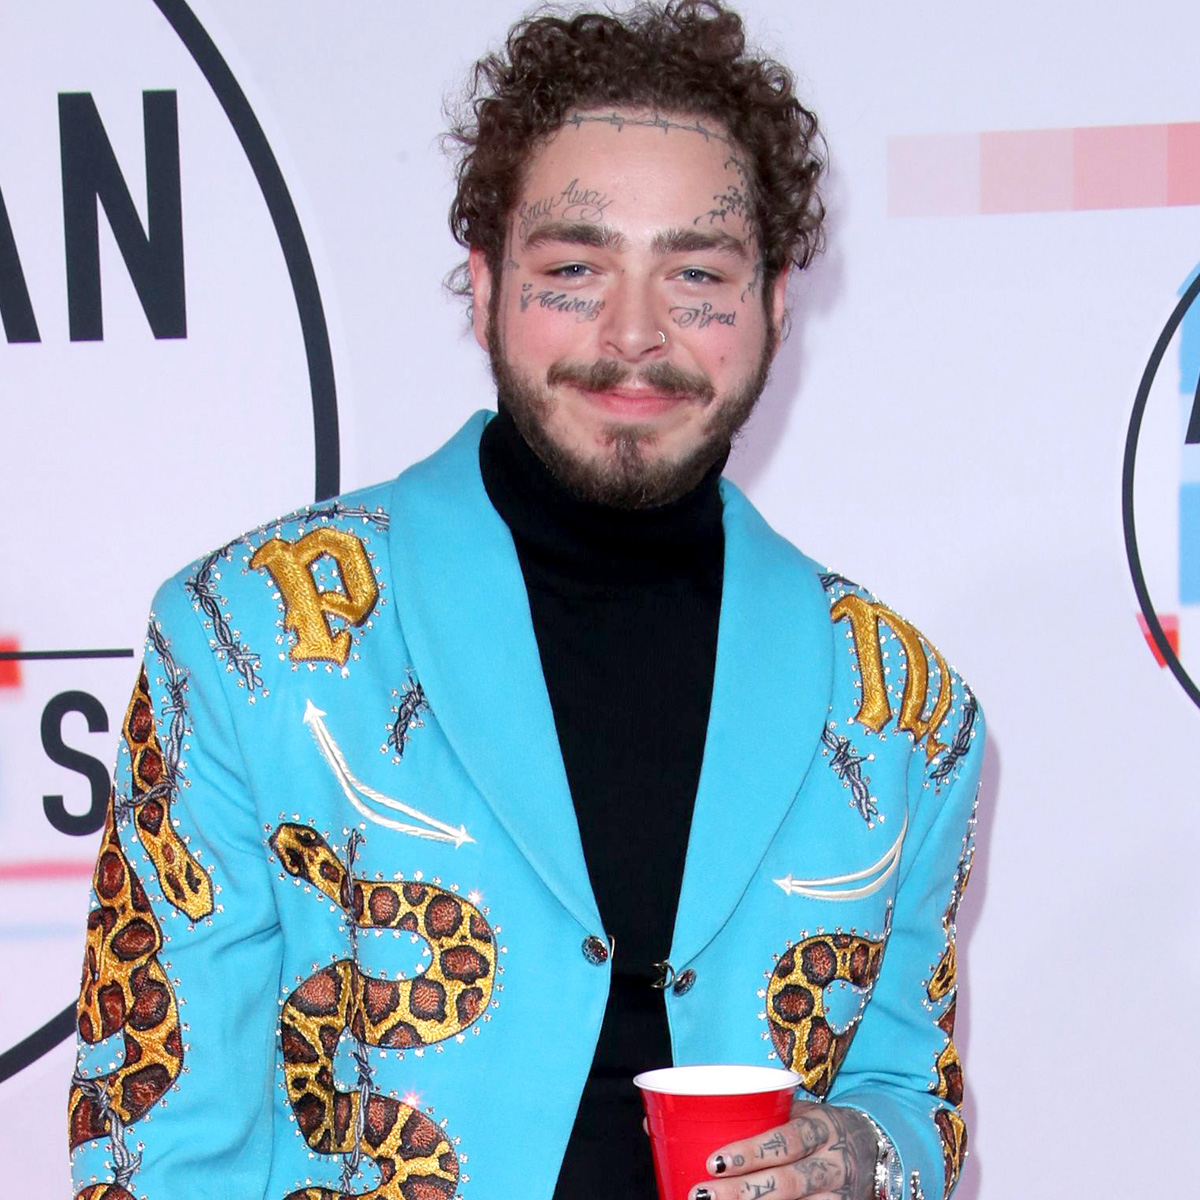 See Post Malone's $1.6 Million New Smile—Diamond Fangs Included